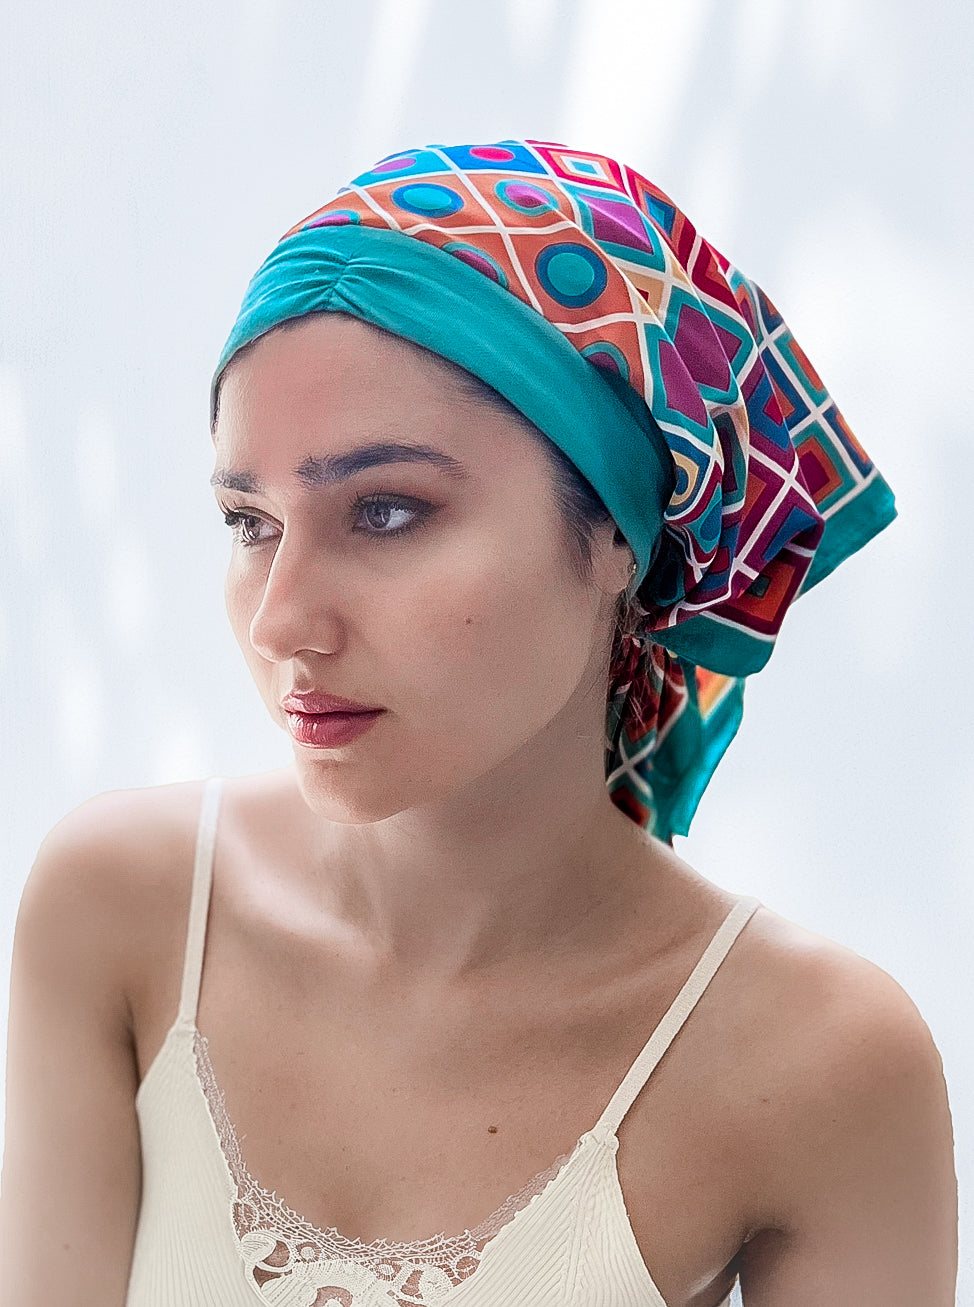 beautiful woman wearing a fashionable headscarf, of Teal  headband and matching and multi color geometric shapes , in the retro kerchief style, designed specifically for those experiencing hair loss